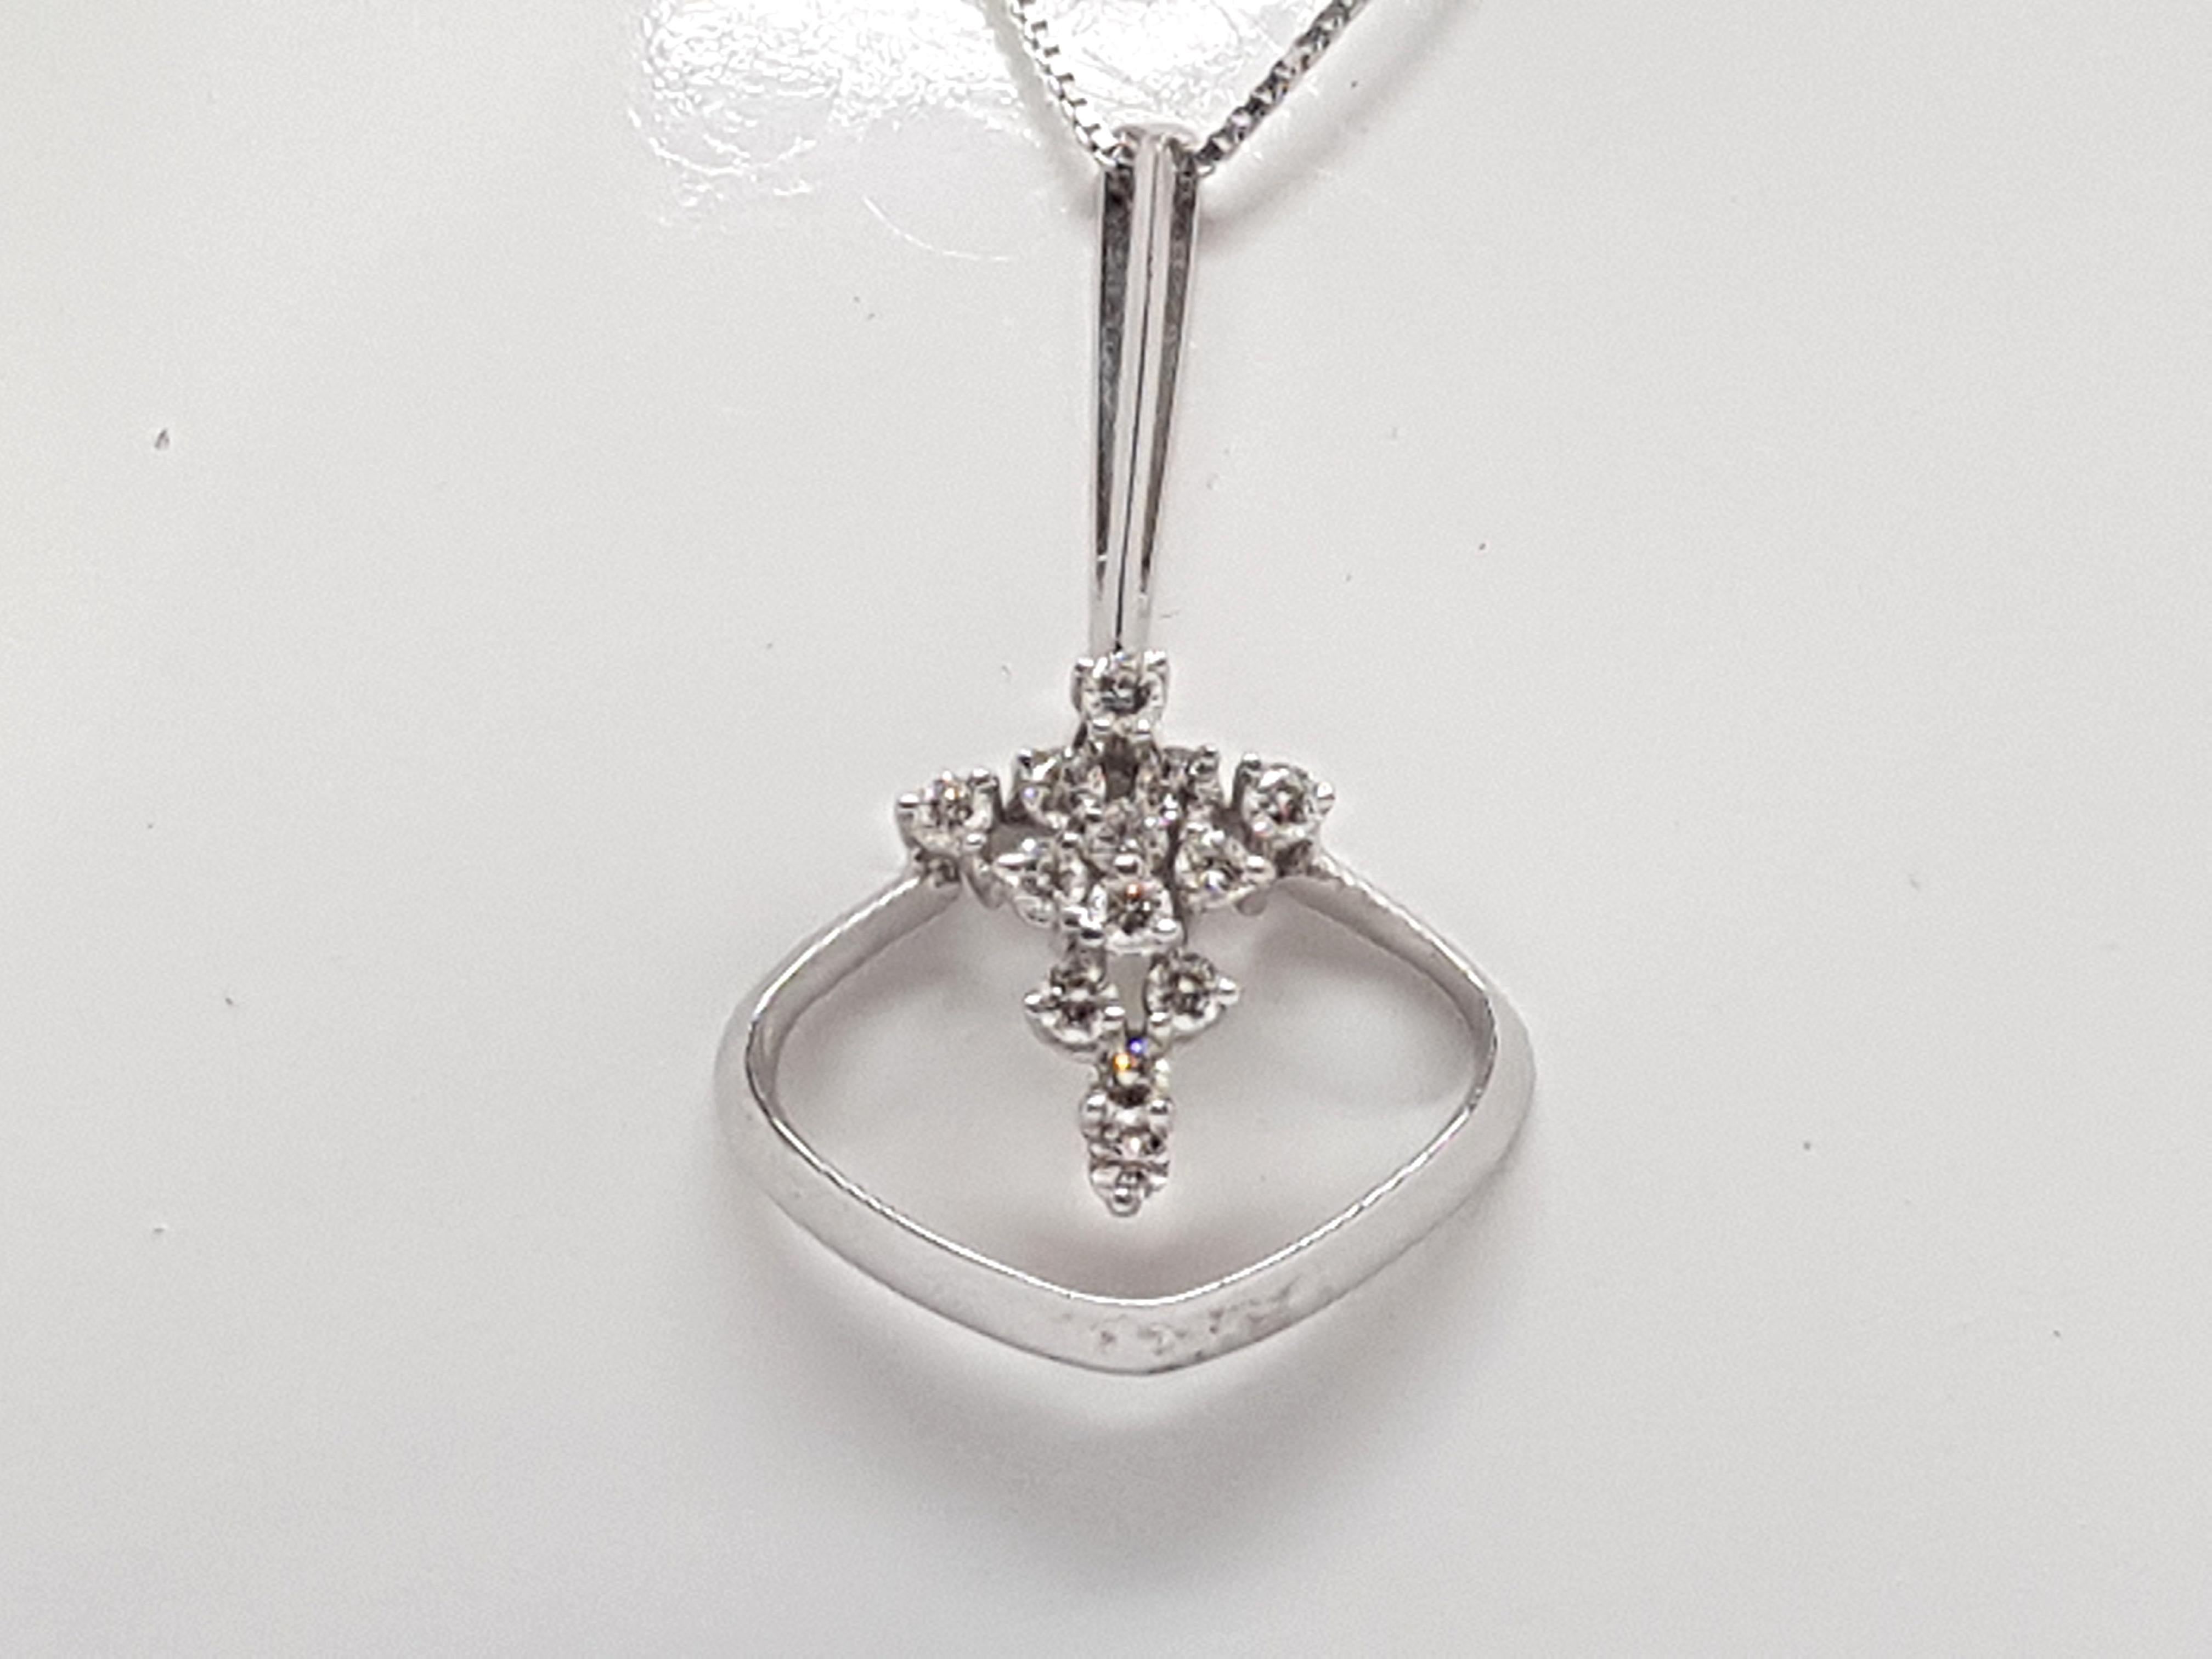 Gold: 18 Karat White Gold 
Weight: 6,91 grams 
Diamonds: 0,91 ct – Colour: F, clarity VS2 
Necklace length: choose from40, 42, 45 or 50 cm 
Length of pendant: 3.7 cm 
Width of pendant: 2.3 cm 
All of our jewellery comes with a certificate and a